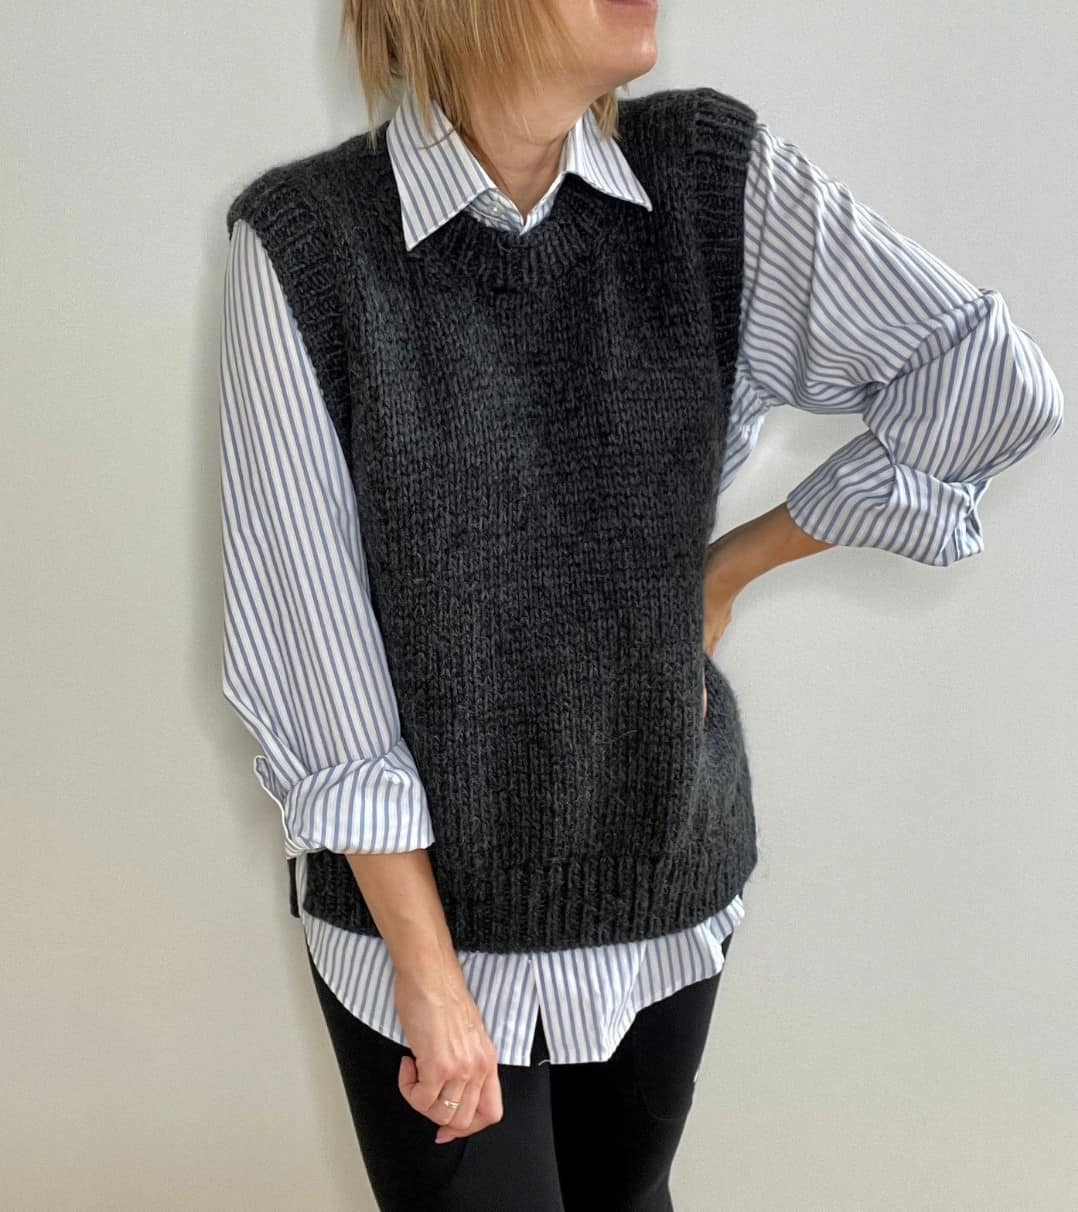 Knitted Vest easy pattern